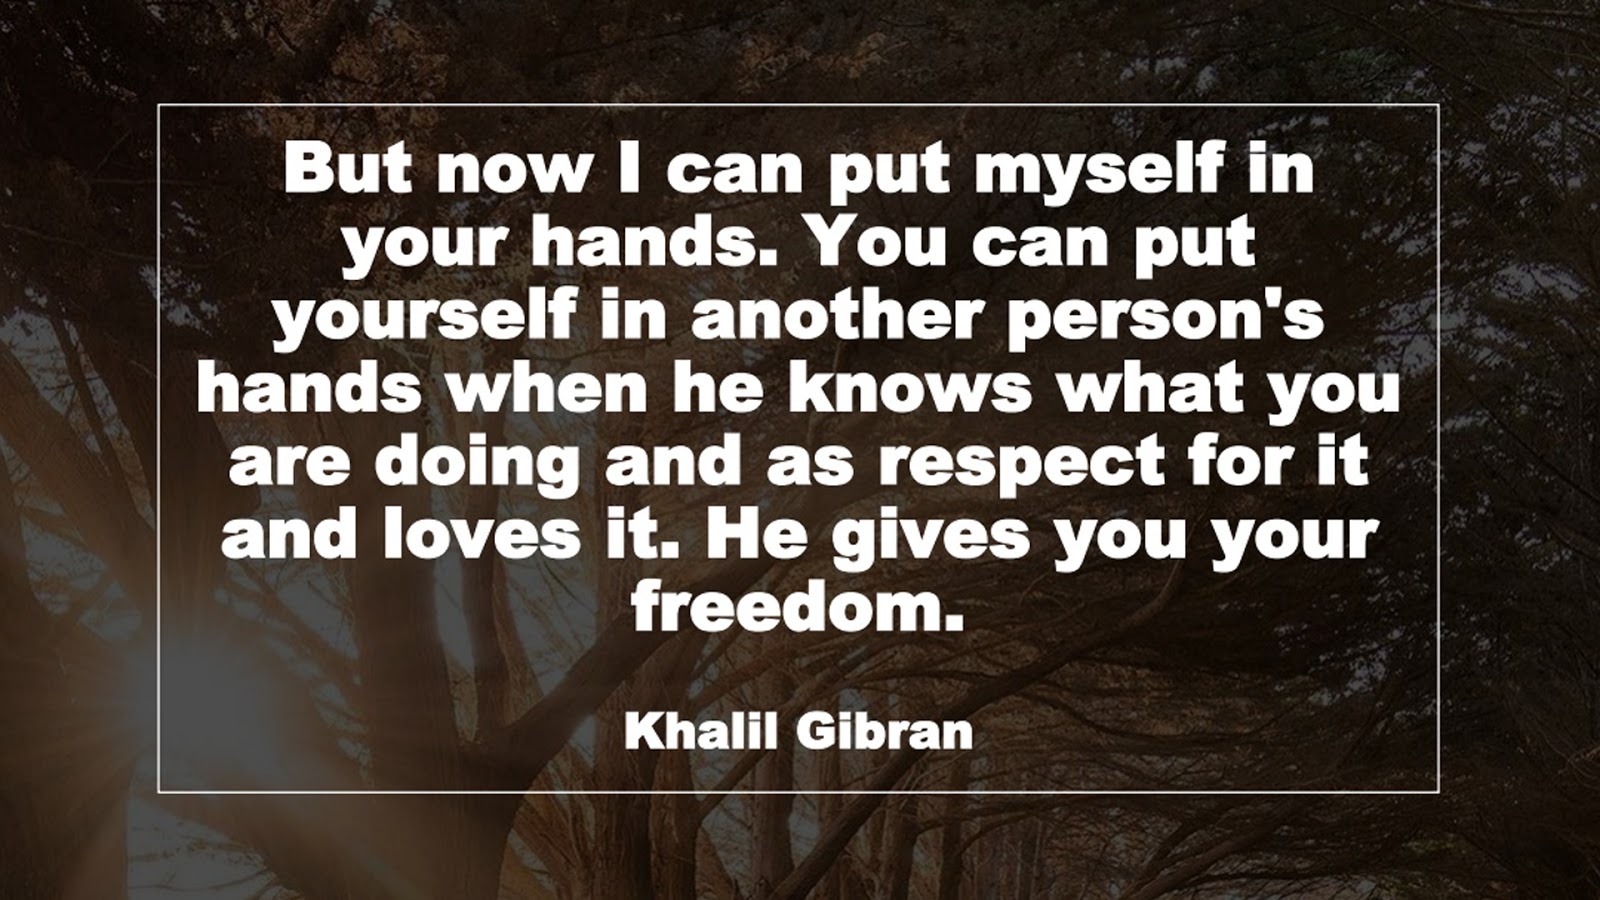 But now I can put myself in your hands. You can put yourself in another person's hands when he knows what you are doing and as respect for it and loves it. He gives you your freedom. (Khalil Gibran)